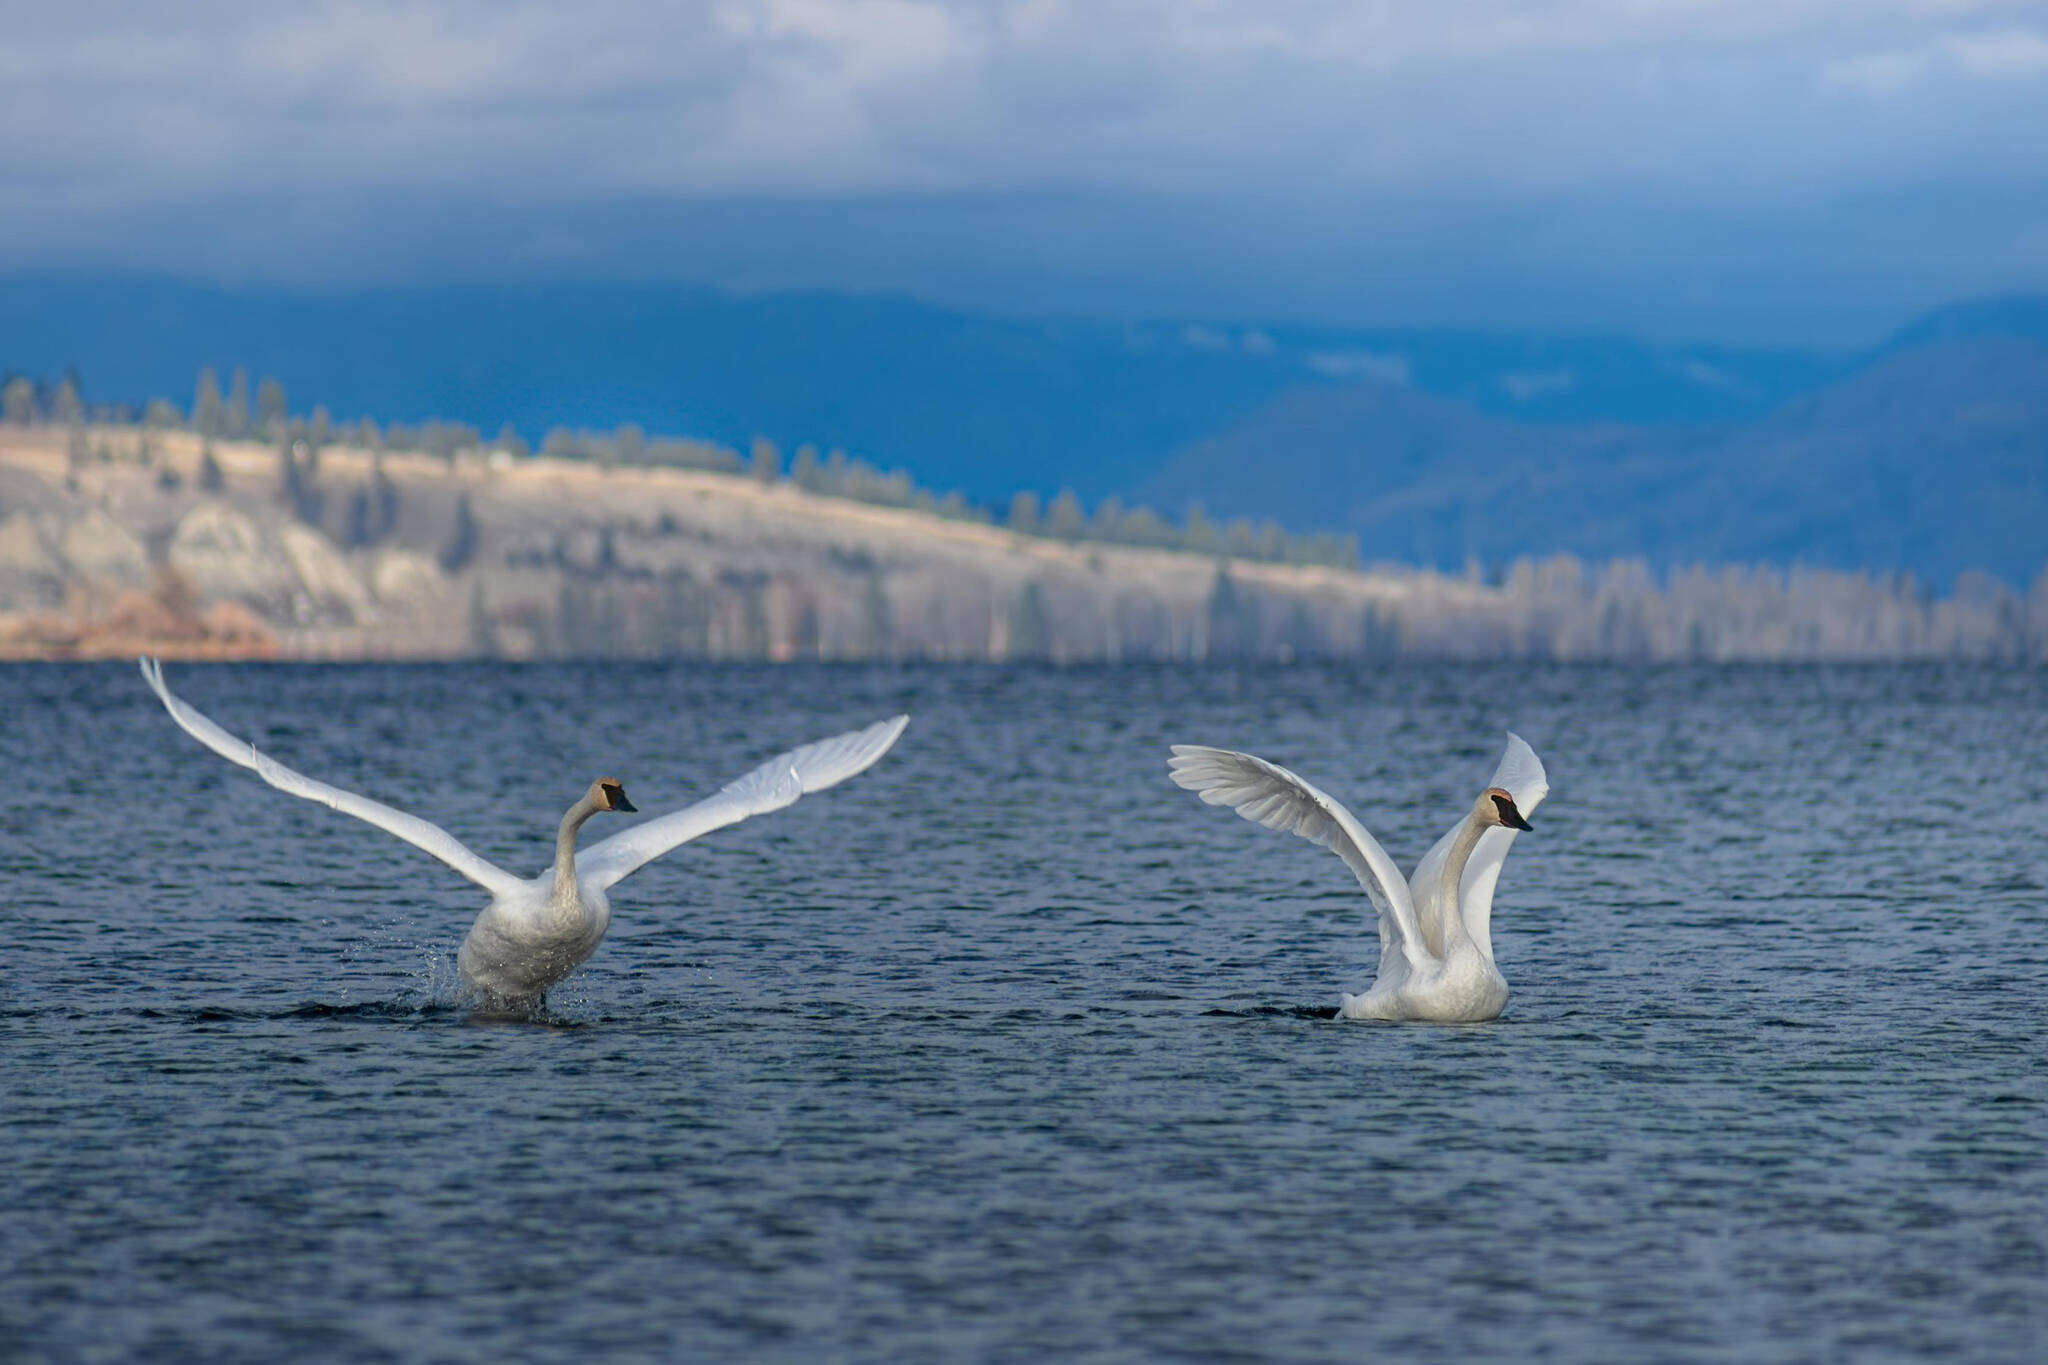 Penticton photographer grabbed this picture of the swans that winter on Okanagan Lake along the edges of Highway 97. (Steve Heer photo)